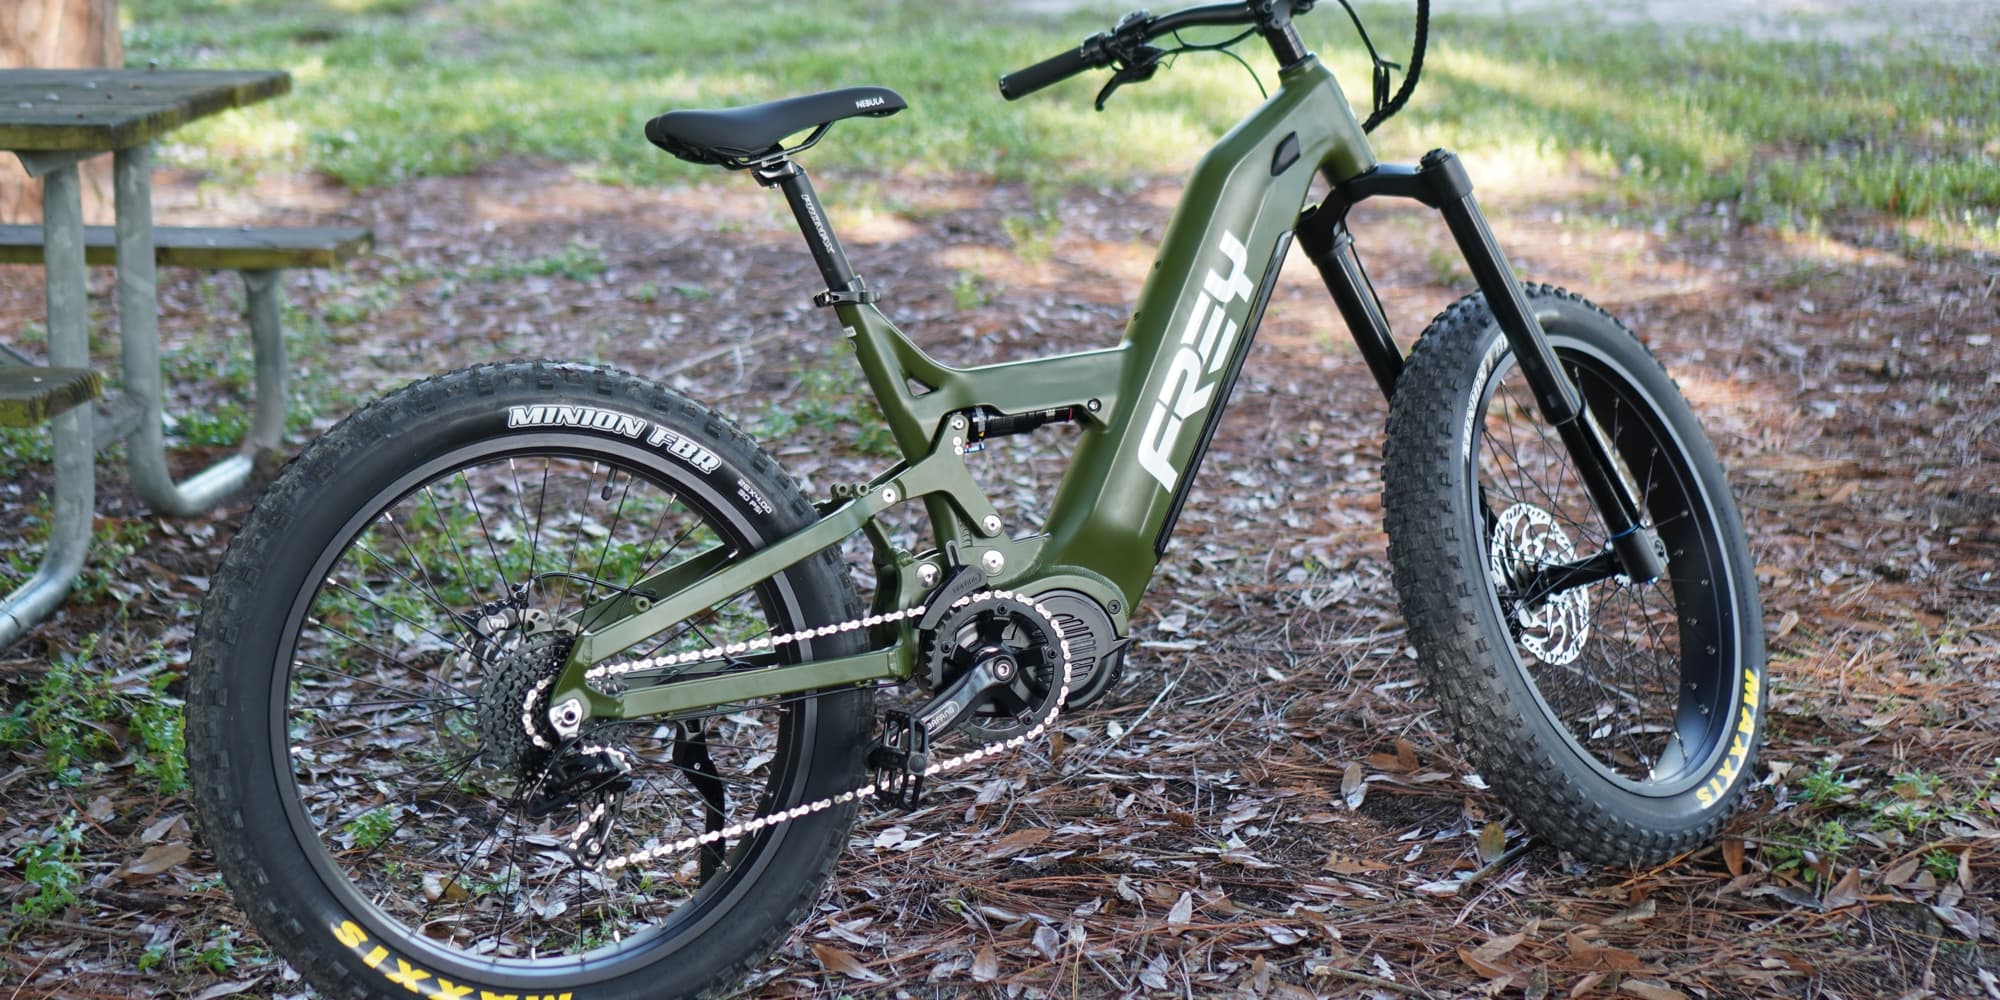 Schema markt Herinnering FREY CC FAT electric bike review: 1,500W and full-suspension fun!